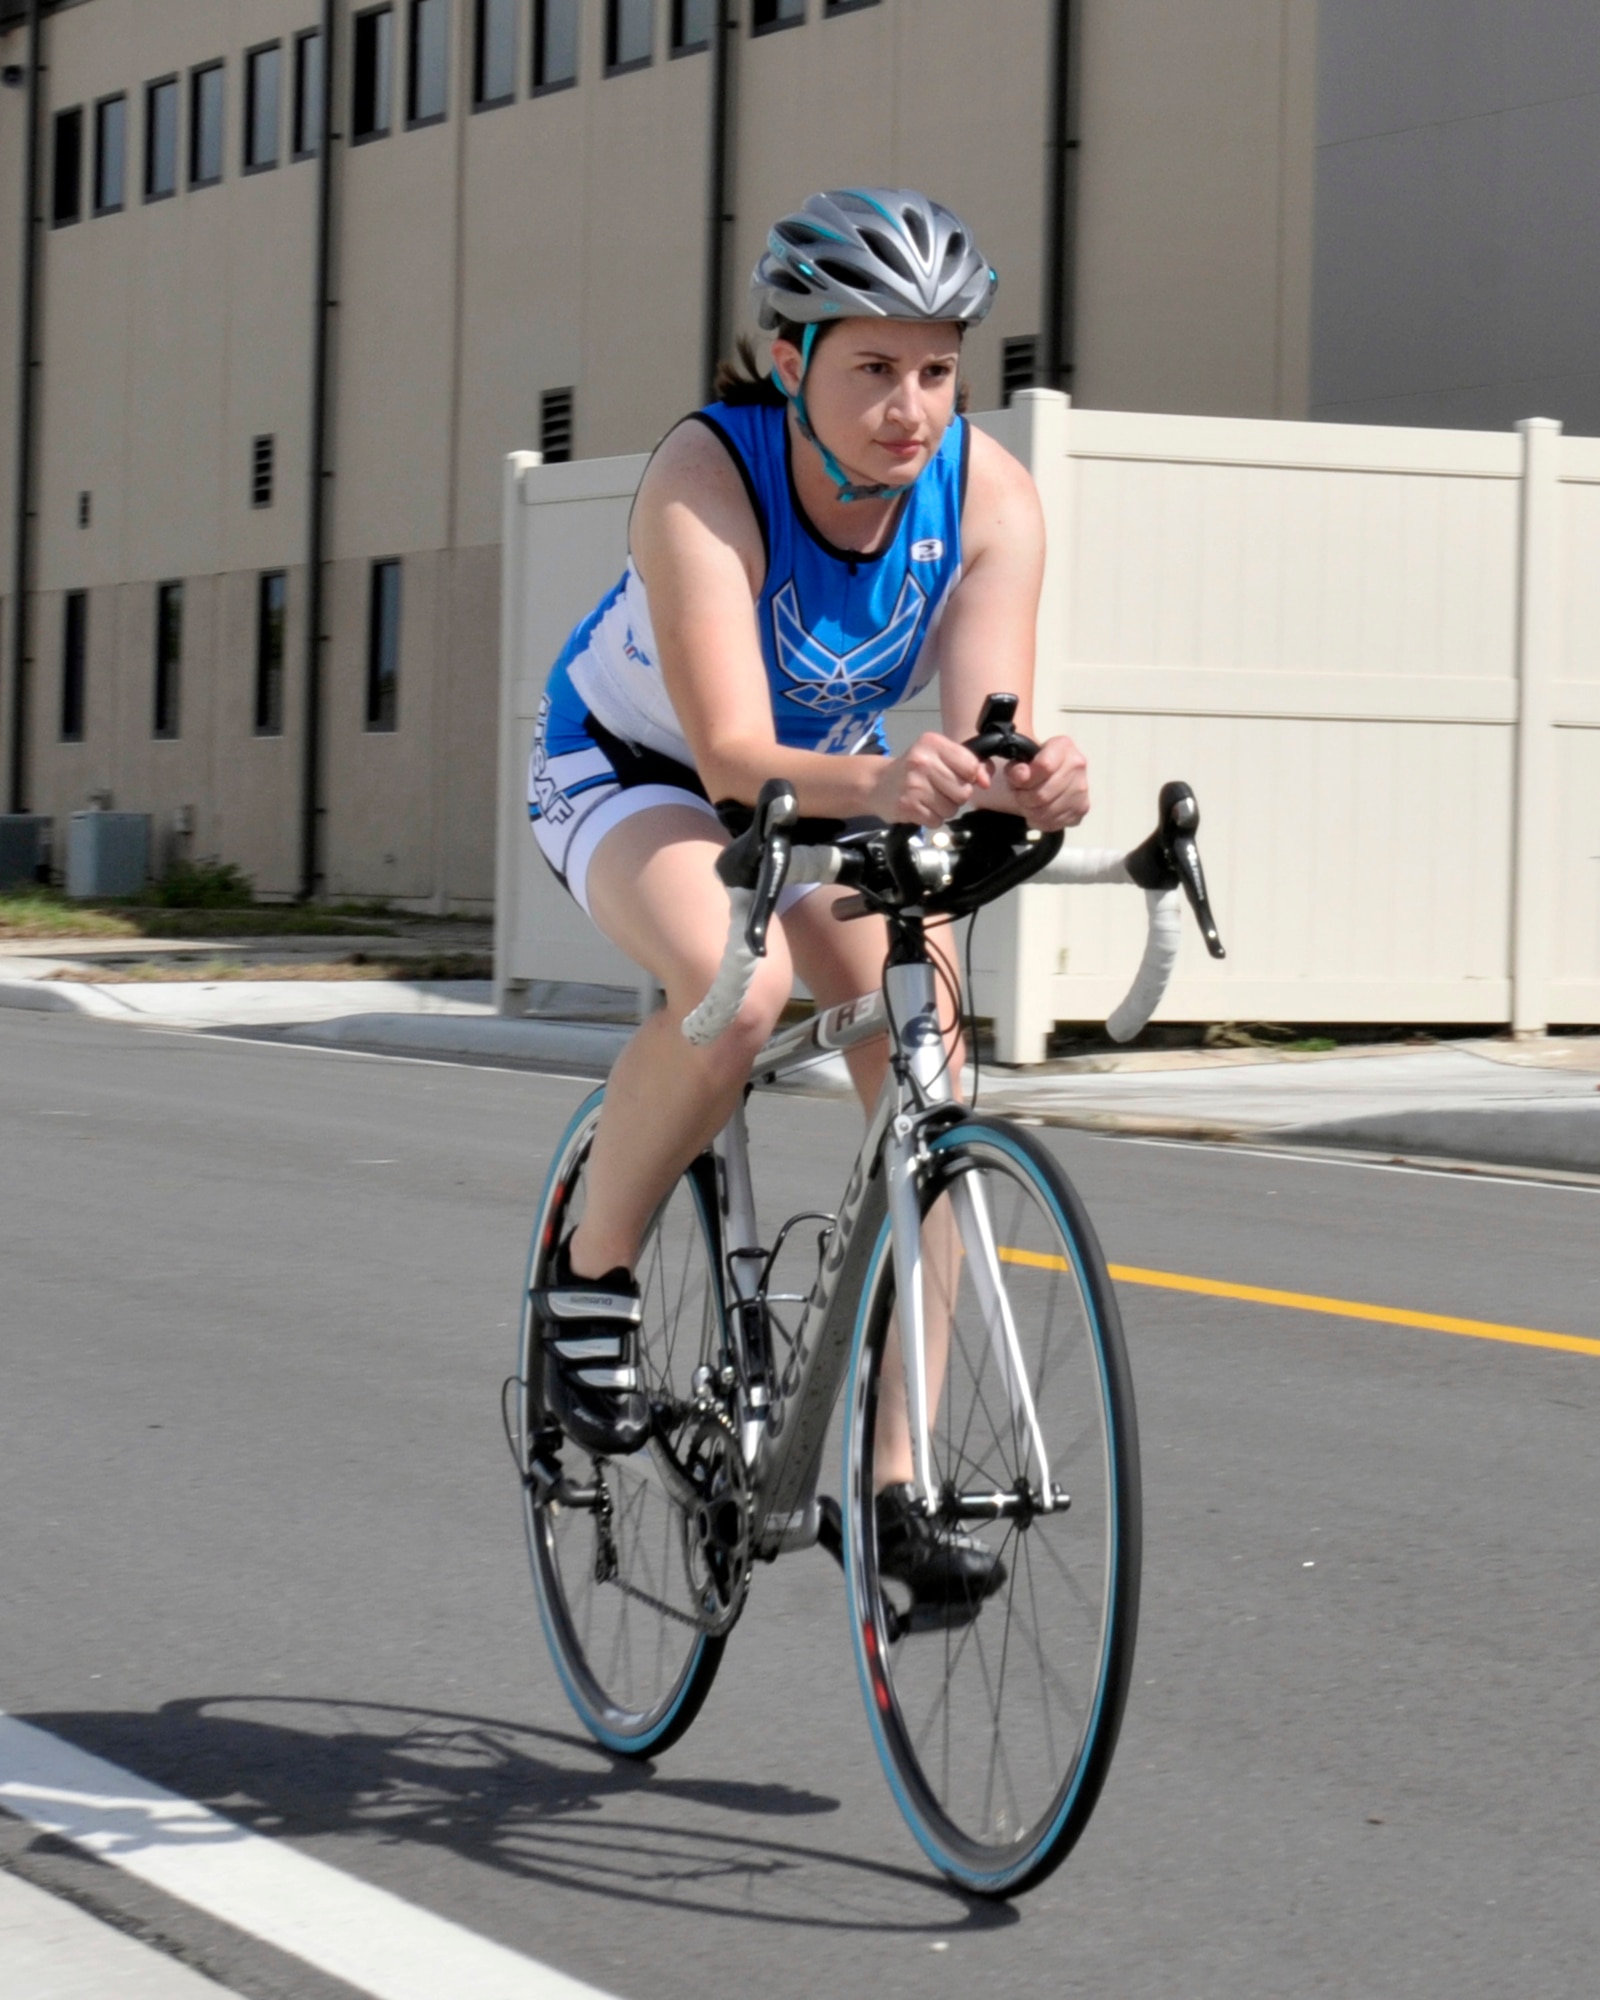 Senior Airman Jaymie Brooks, 125th Fighter Wing Medical Technician, trains for the Armed Forces Triathlon (Photo by Technical Sgt Jaclyn Lyons)